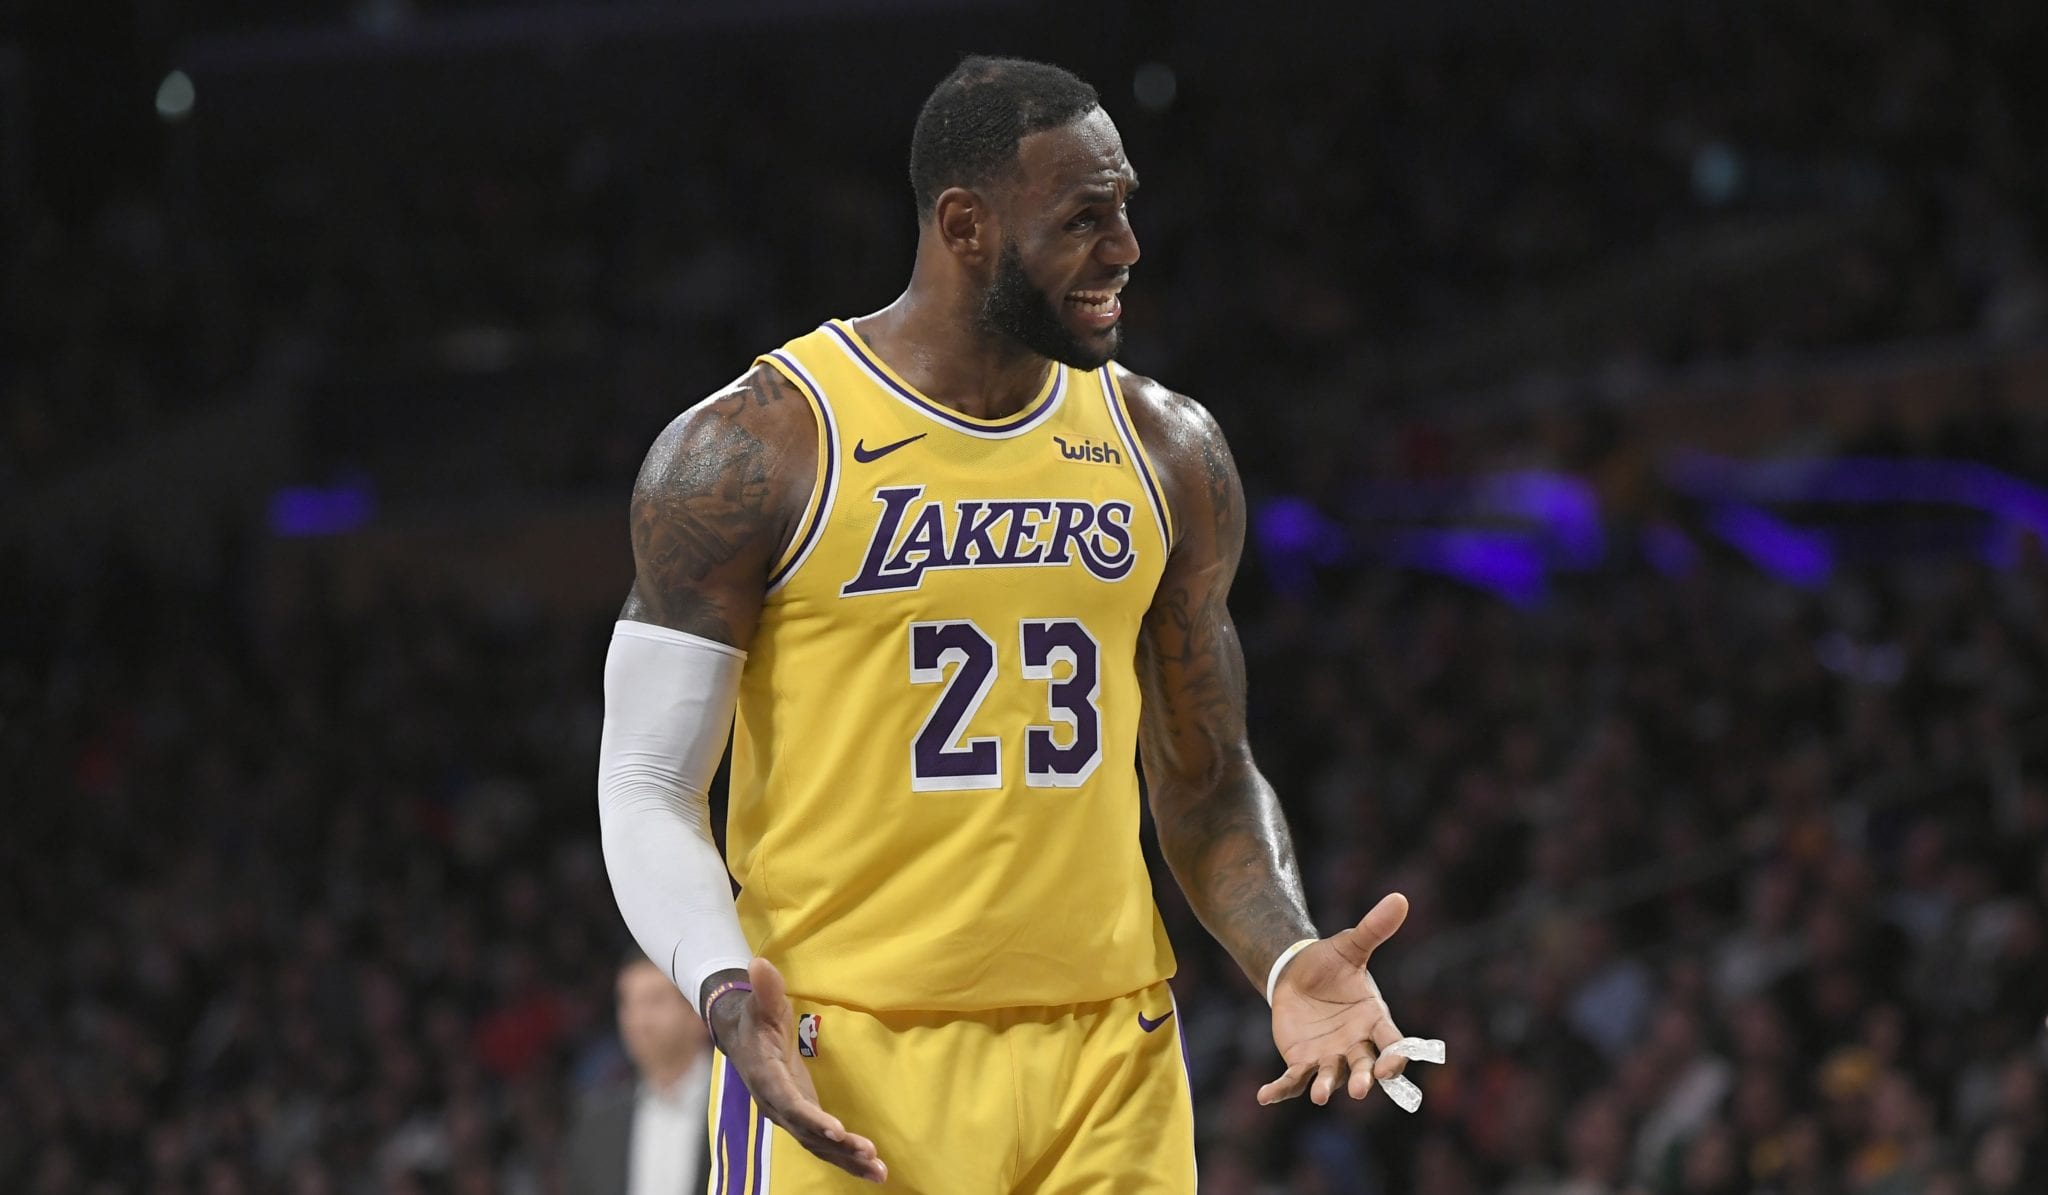 LeBron James Blasts NBA’s Decision to Hold All-Star Game During Pandemic